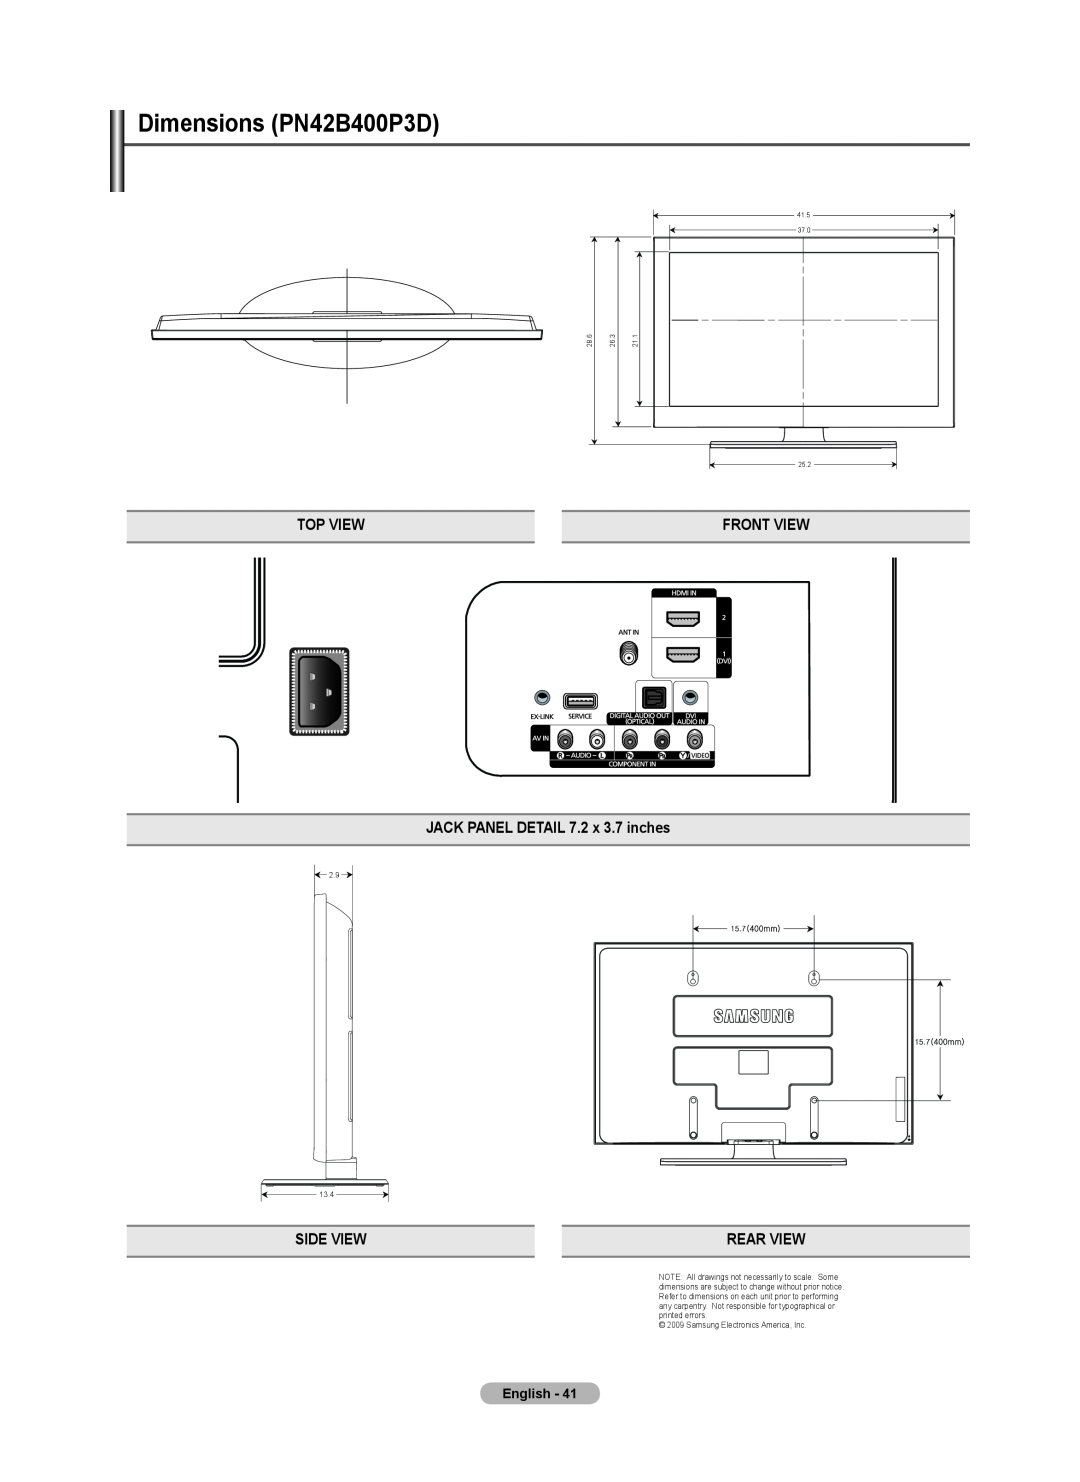 Samsung BN68-02426A-00 Top View, JACK PANEL DETAIL 7.2 x 3.7 inches, Side View, Rear View, Front View, English, 41.5, 37.0 